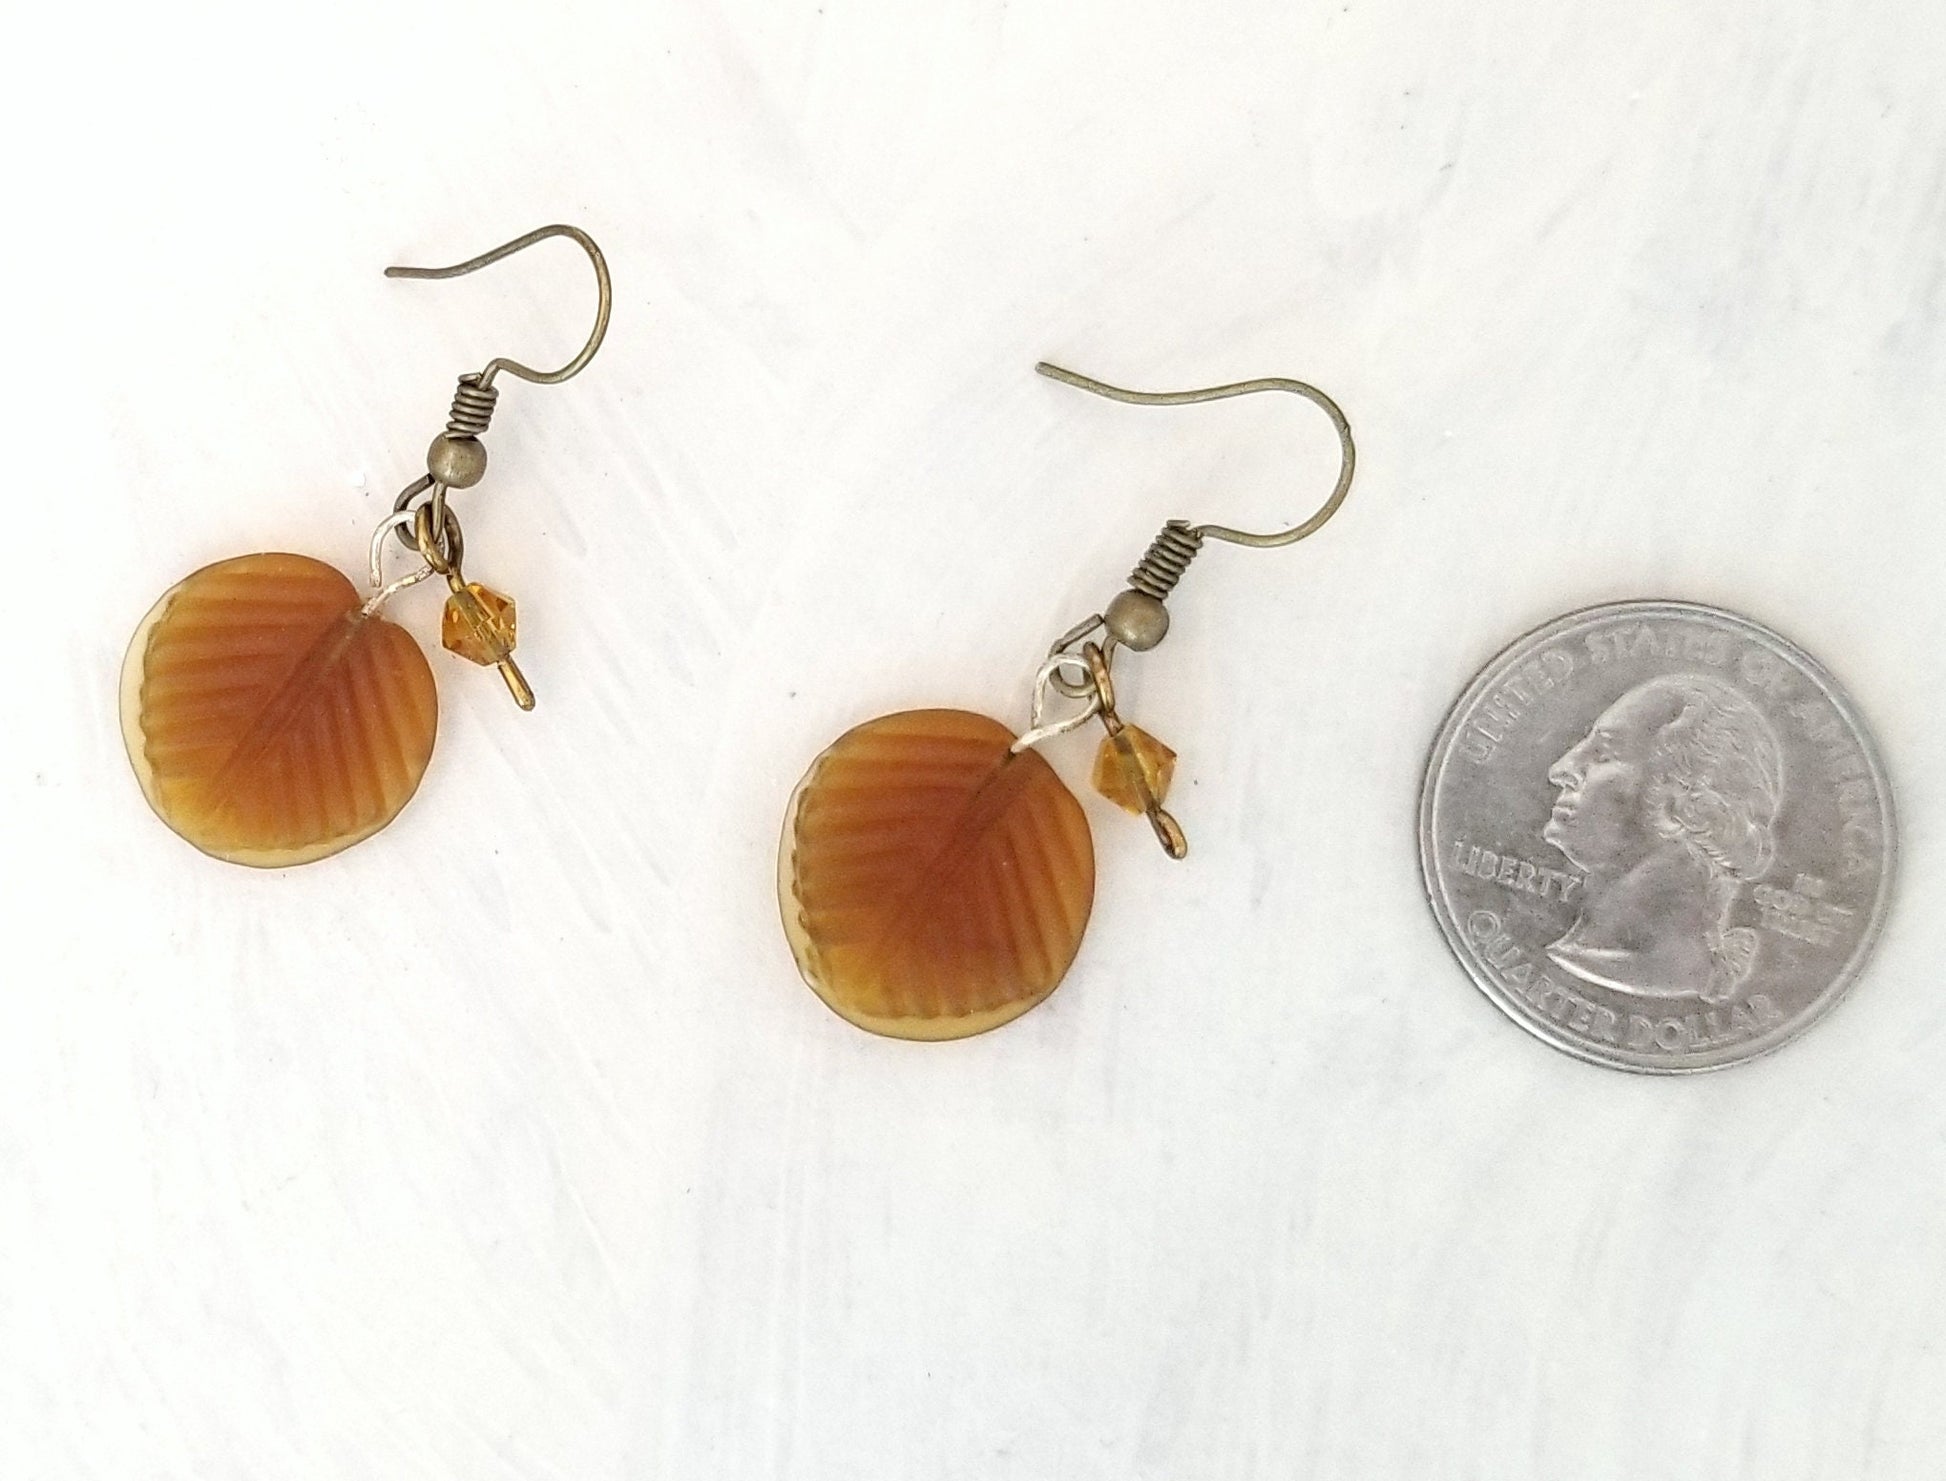 Medium Glass Leaf Earrings in Frosted Brown, Wedding, Bridesmaid, Art Nouveau, Belle Époque, Renaissance, Forest, Choice of Closure Types